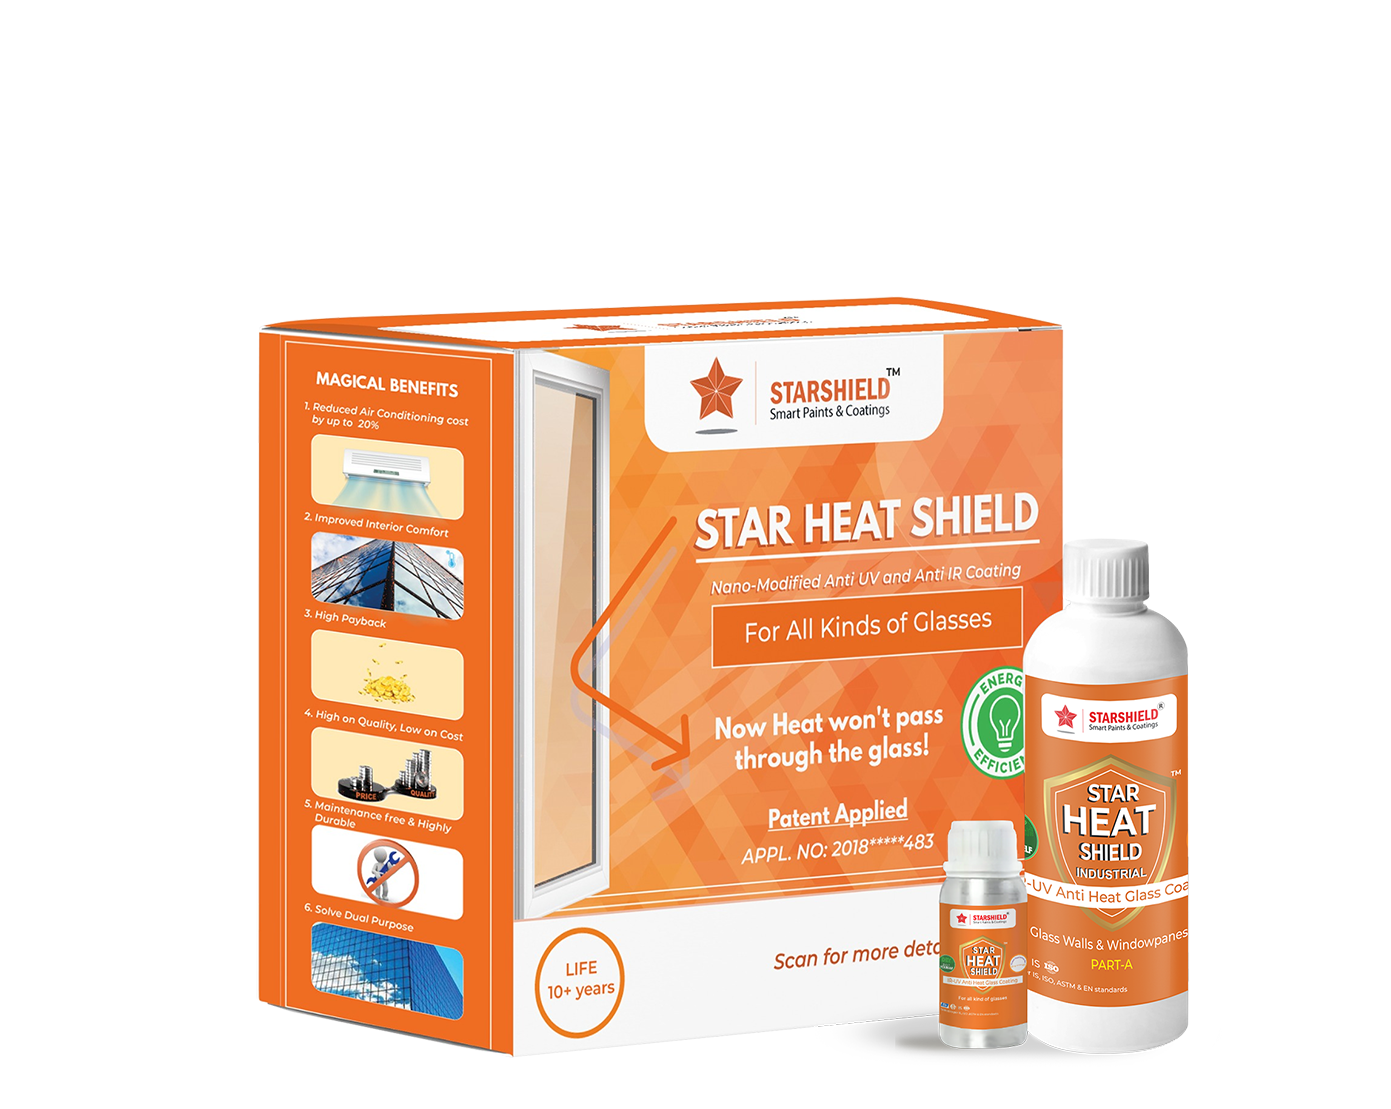 Discover Star Heat Shield: Ultimate Sun Control Glass Coating for homes, businesses. Transparent, translucent, frosted finishes available.